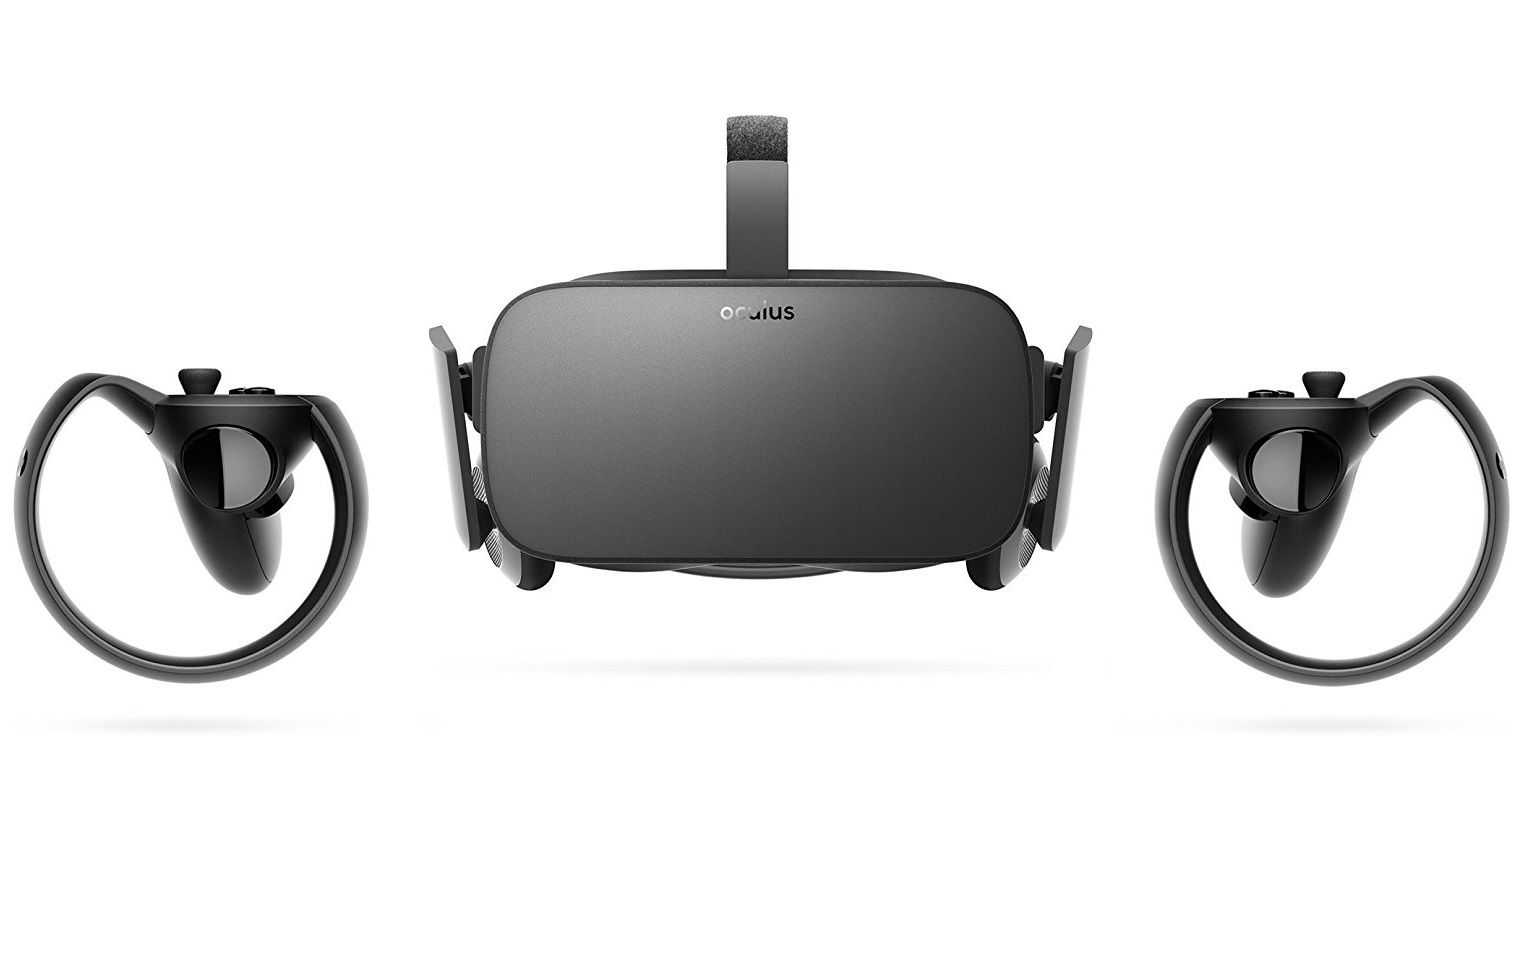 Oculus Rift Bundle Now Discounted to $399, For a Limited Time